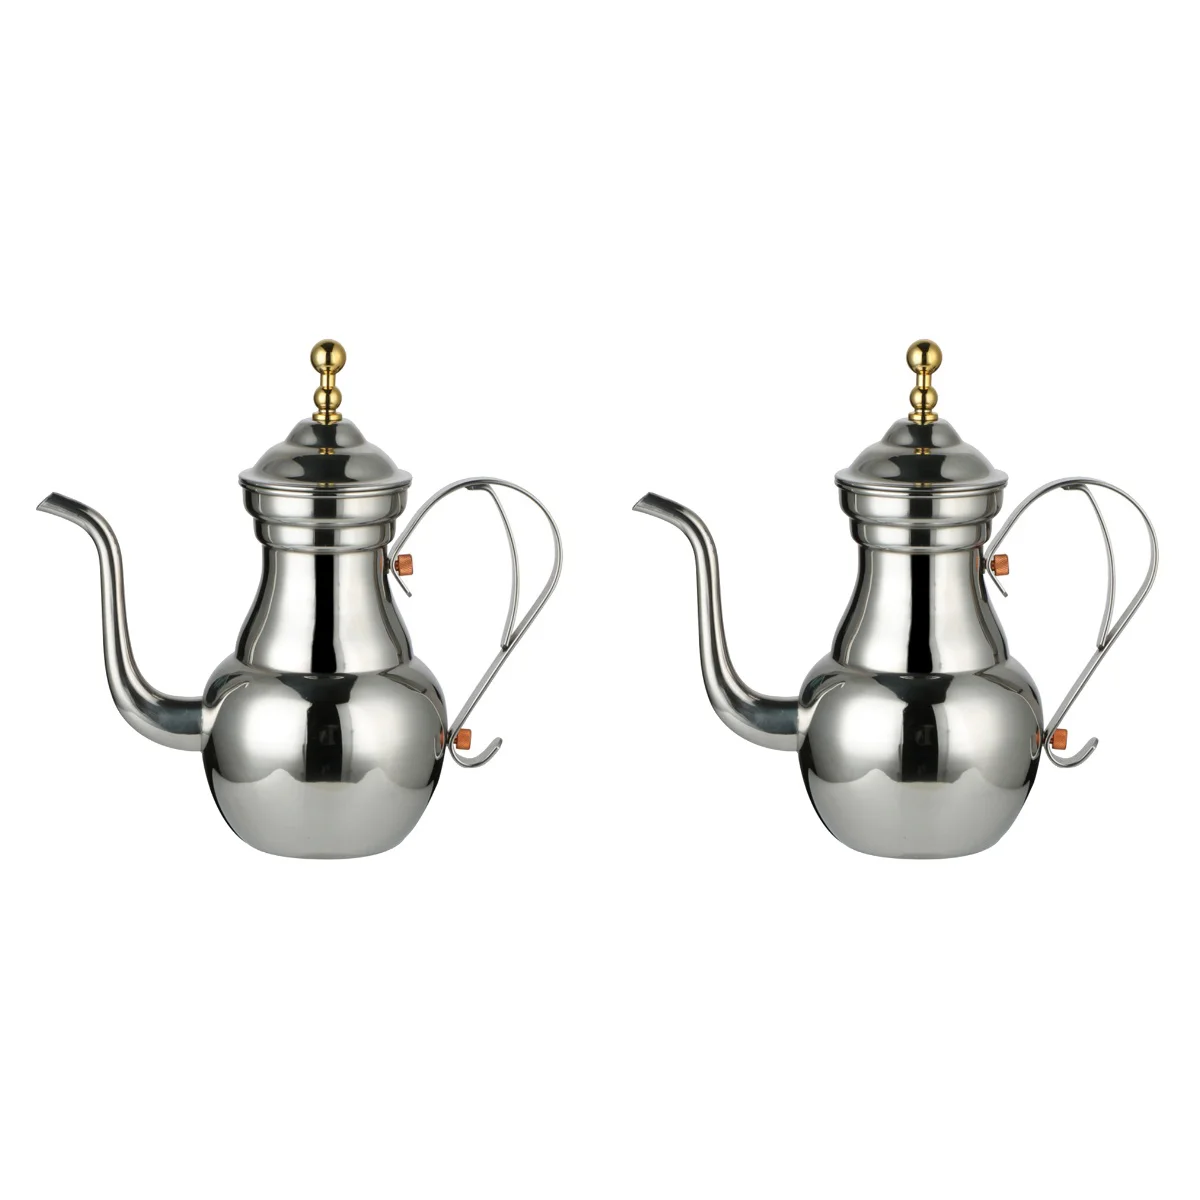 

Kettle Tea Coffee Teapot Stainless Steel Pour Espresso Boiling Over Water Pot Pitcher Filterpots Stove Stovetop Lemonade Turkish